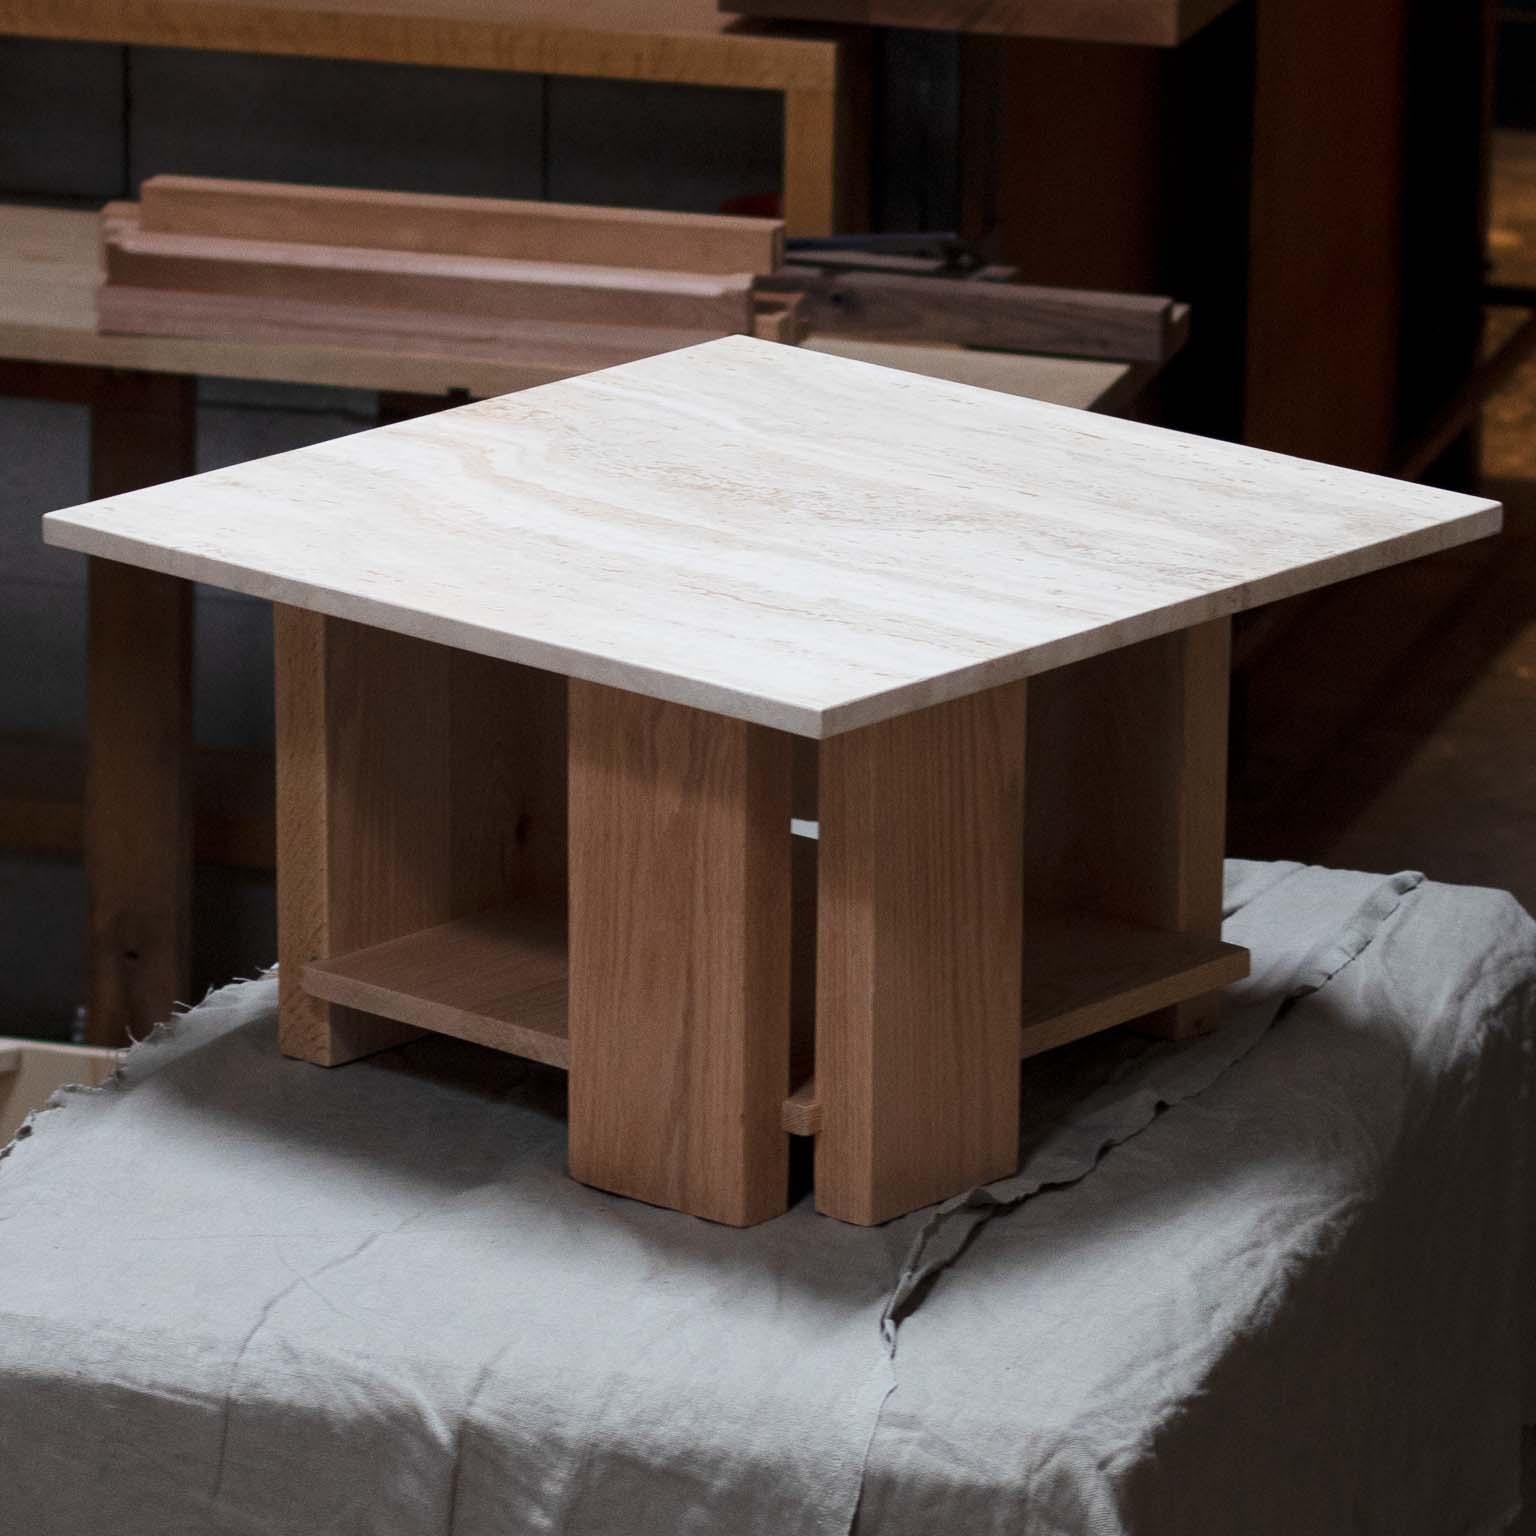 The Robie table is inspired by the design of the Robie House, by Frank Lloyd Wright. A, asymmetrical, cantilevered design creates movement and interest in a design that comprised of linear shapes. The travertine top is stunning, especially when